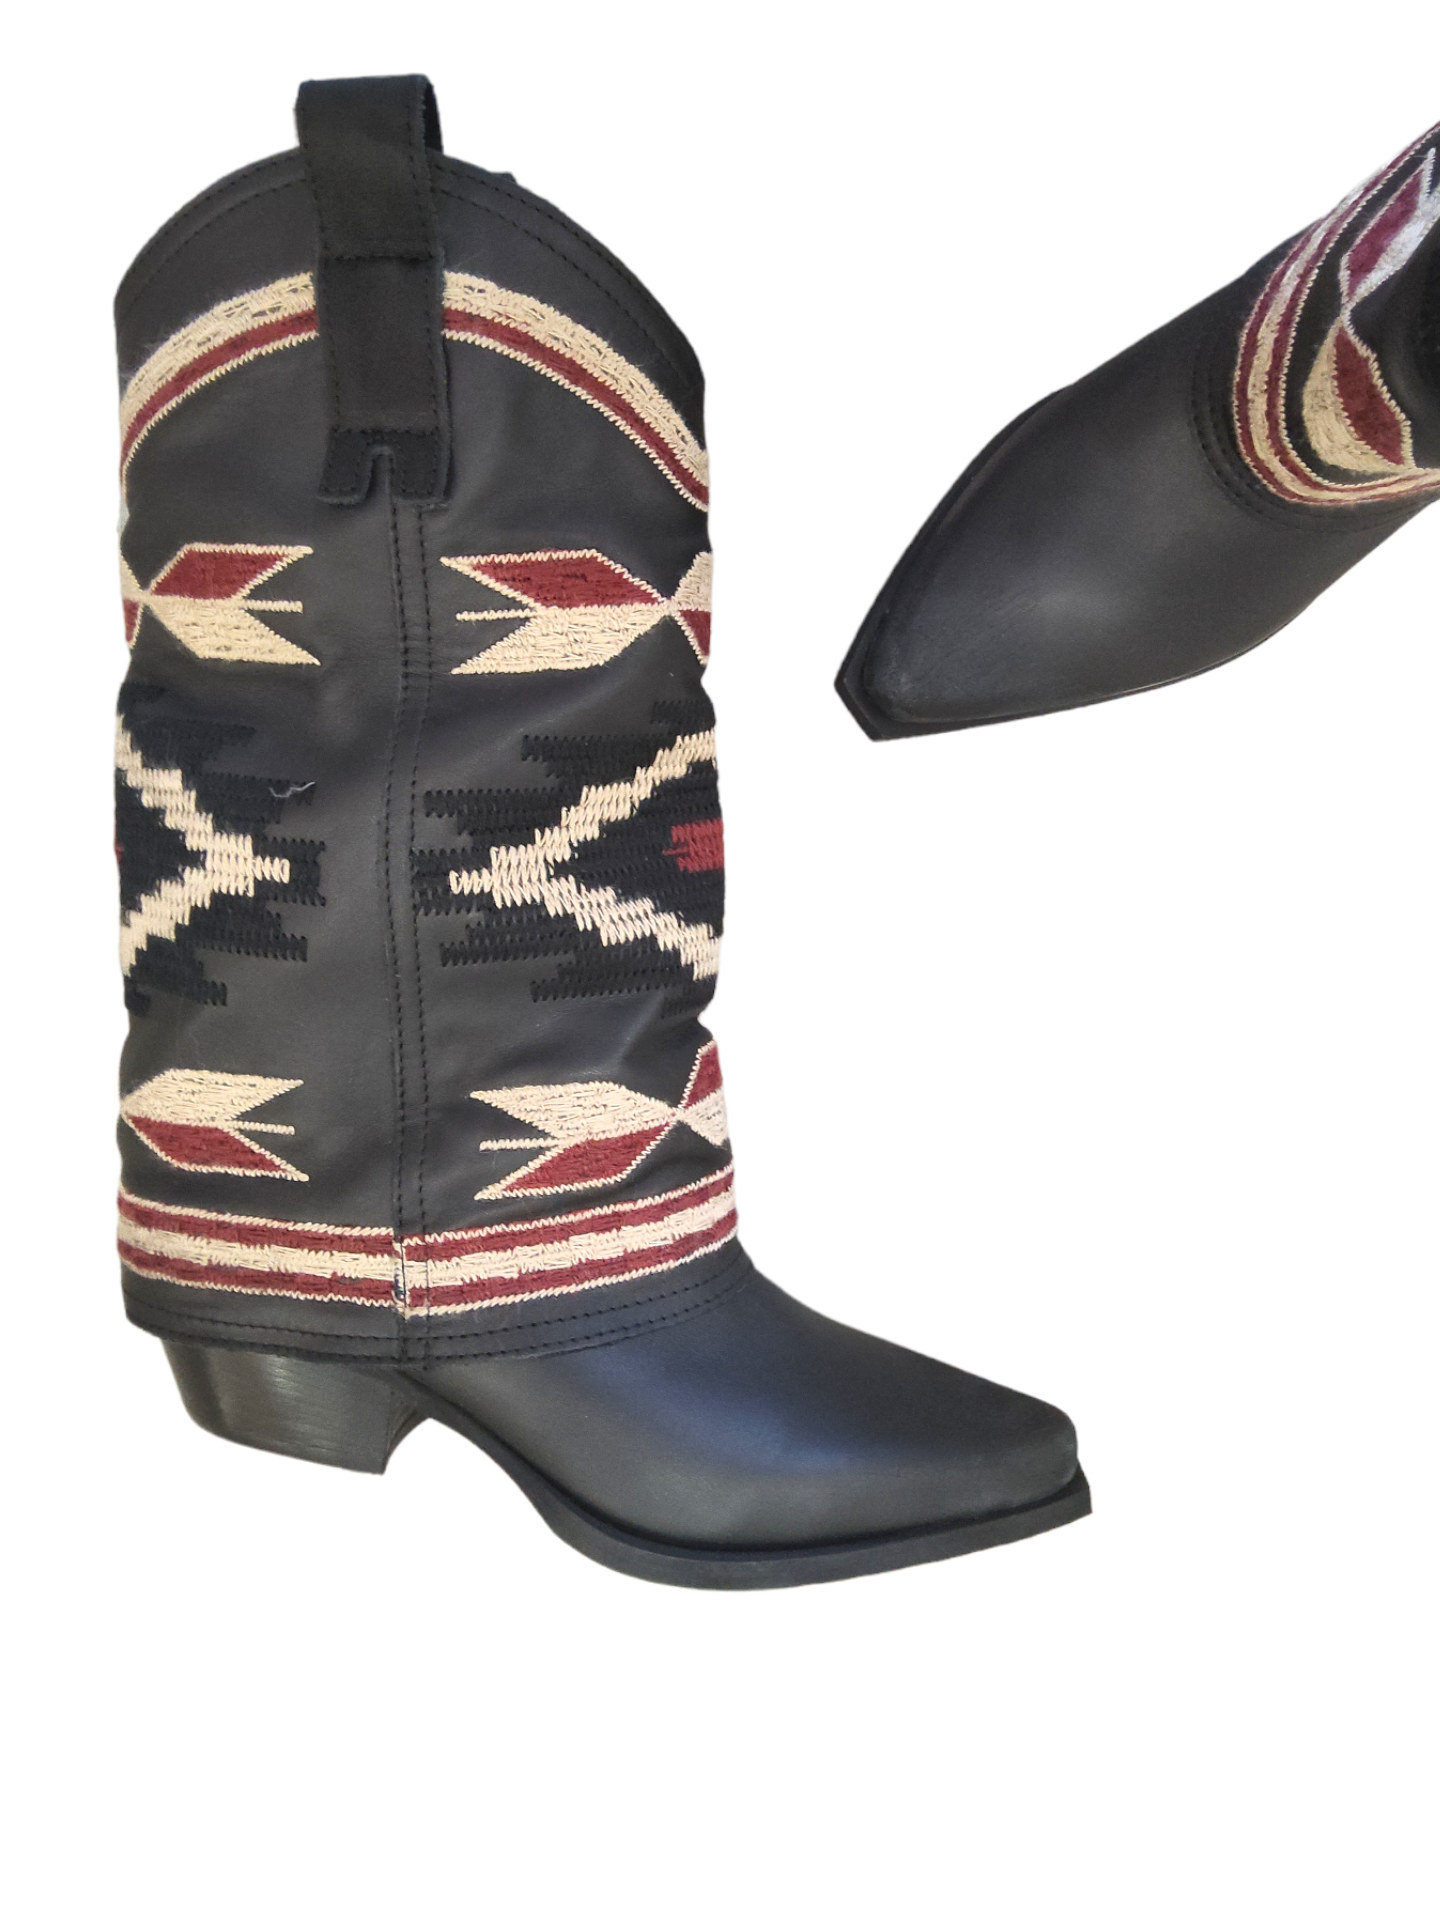 Western style boot